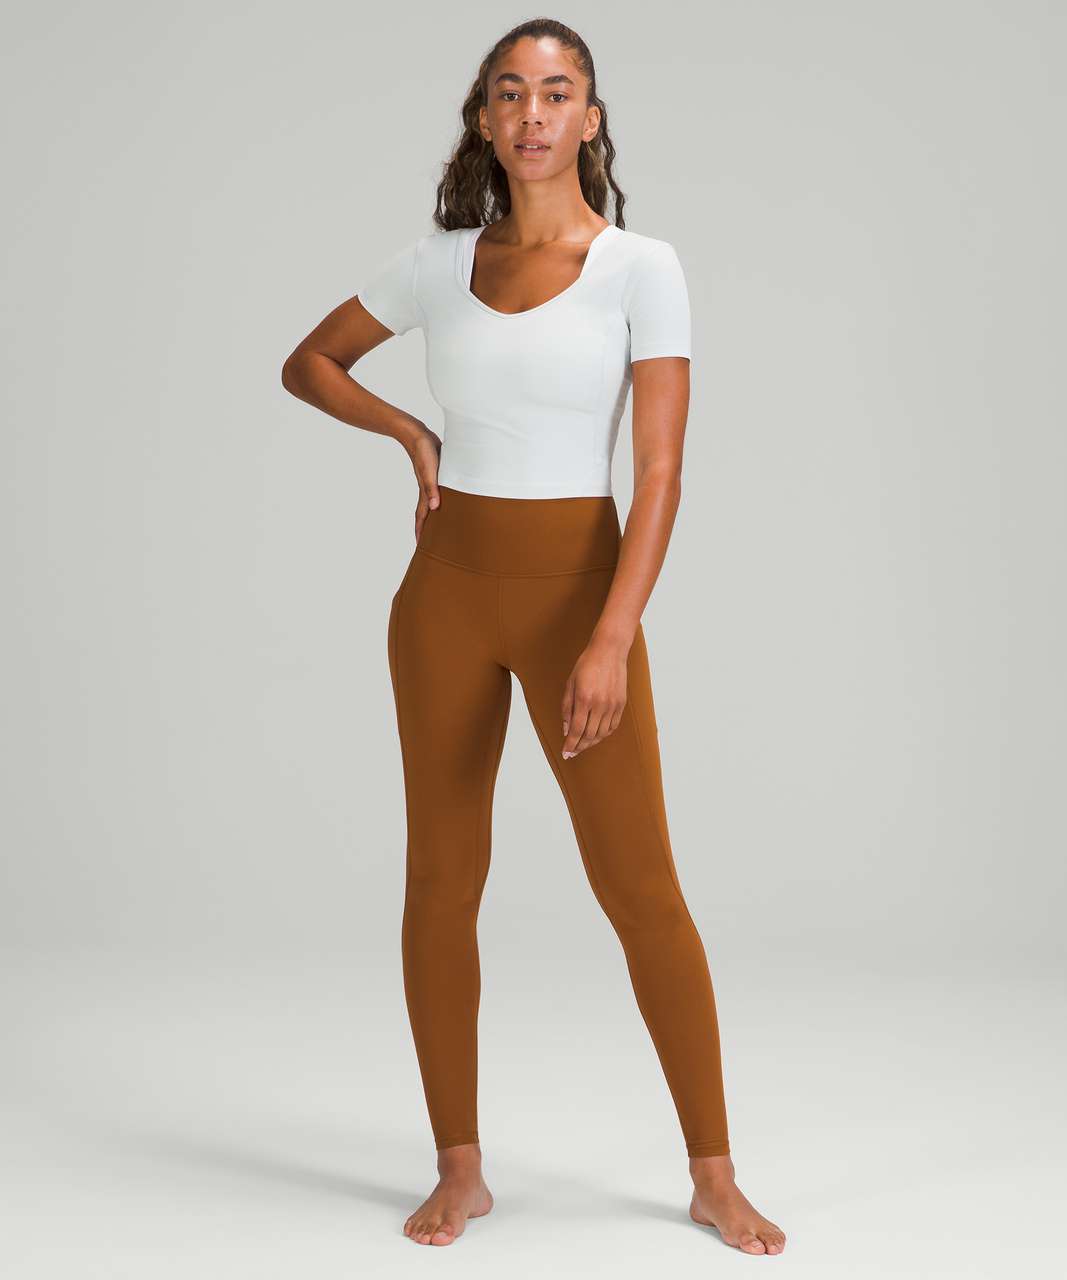 Lululemon Align High-Rise Pant with Pockets 28" - Copper Brown